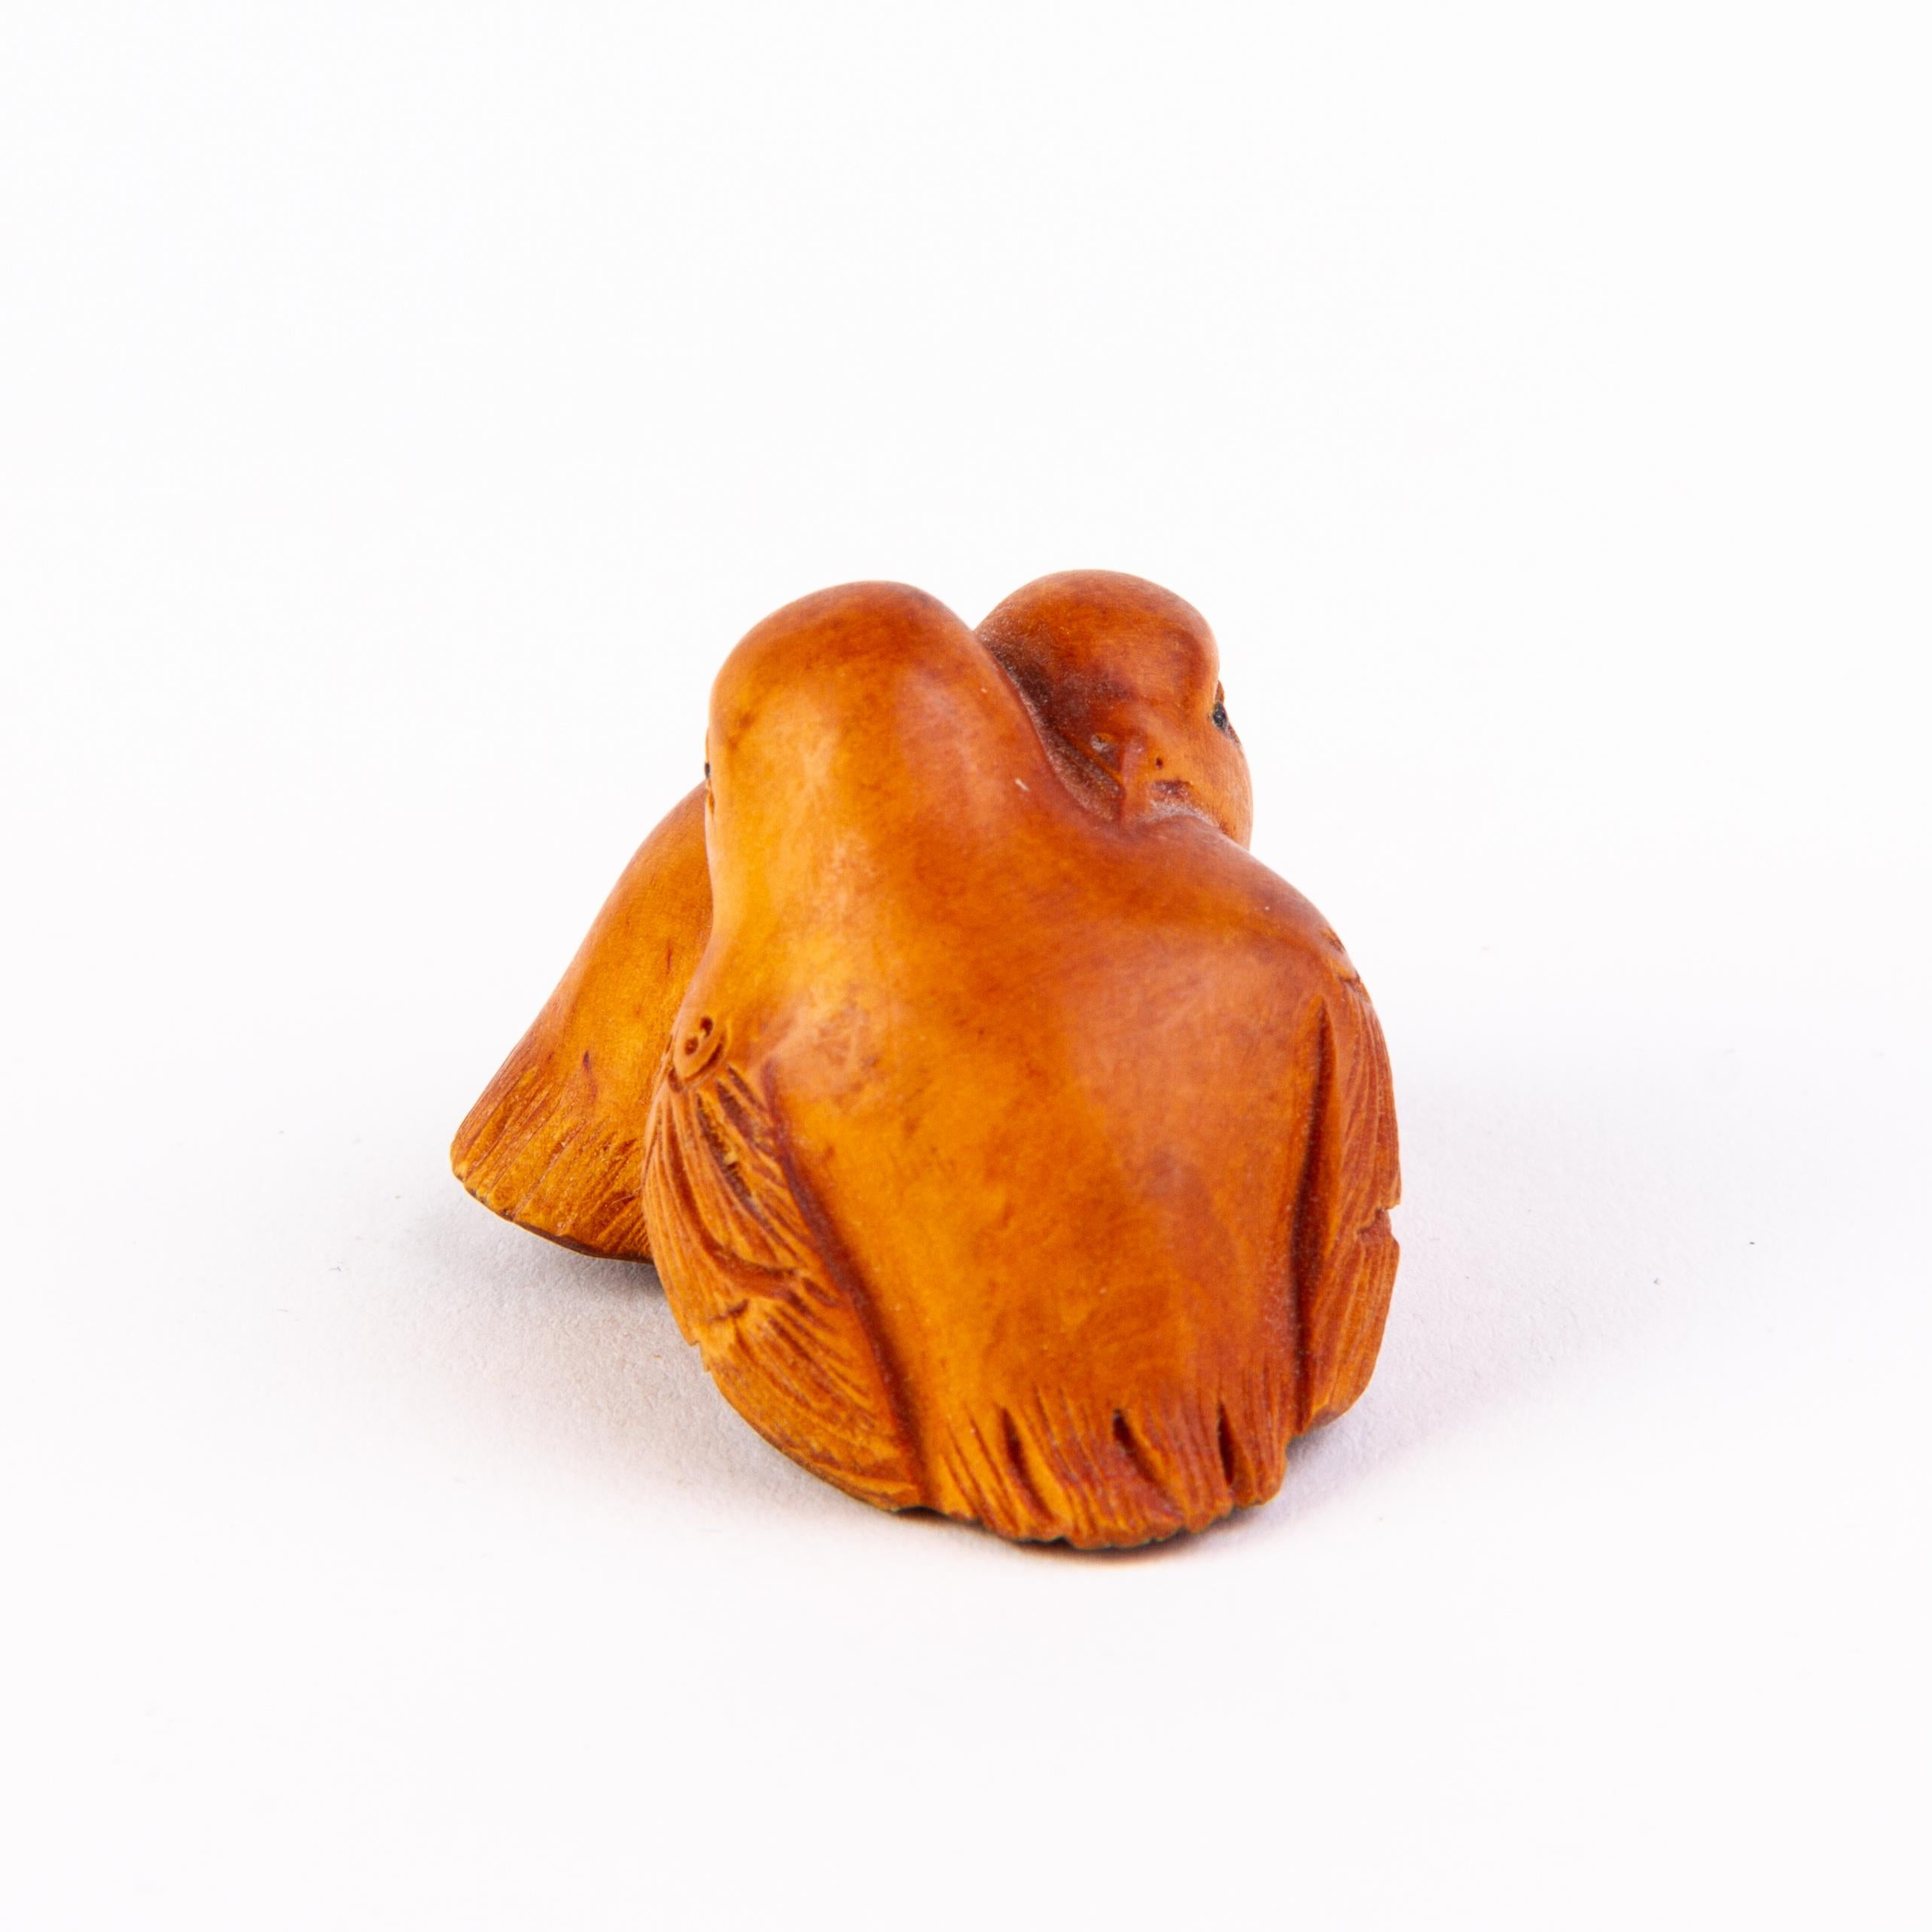 In good condition
From a private collection
Free international shipping
Signed Japanese Boxwood Netsuke Inro of Birds 